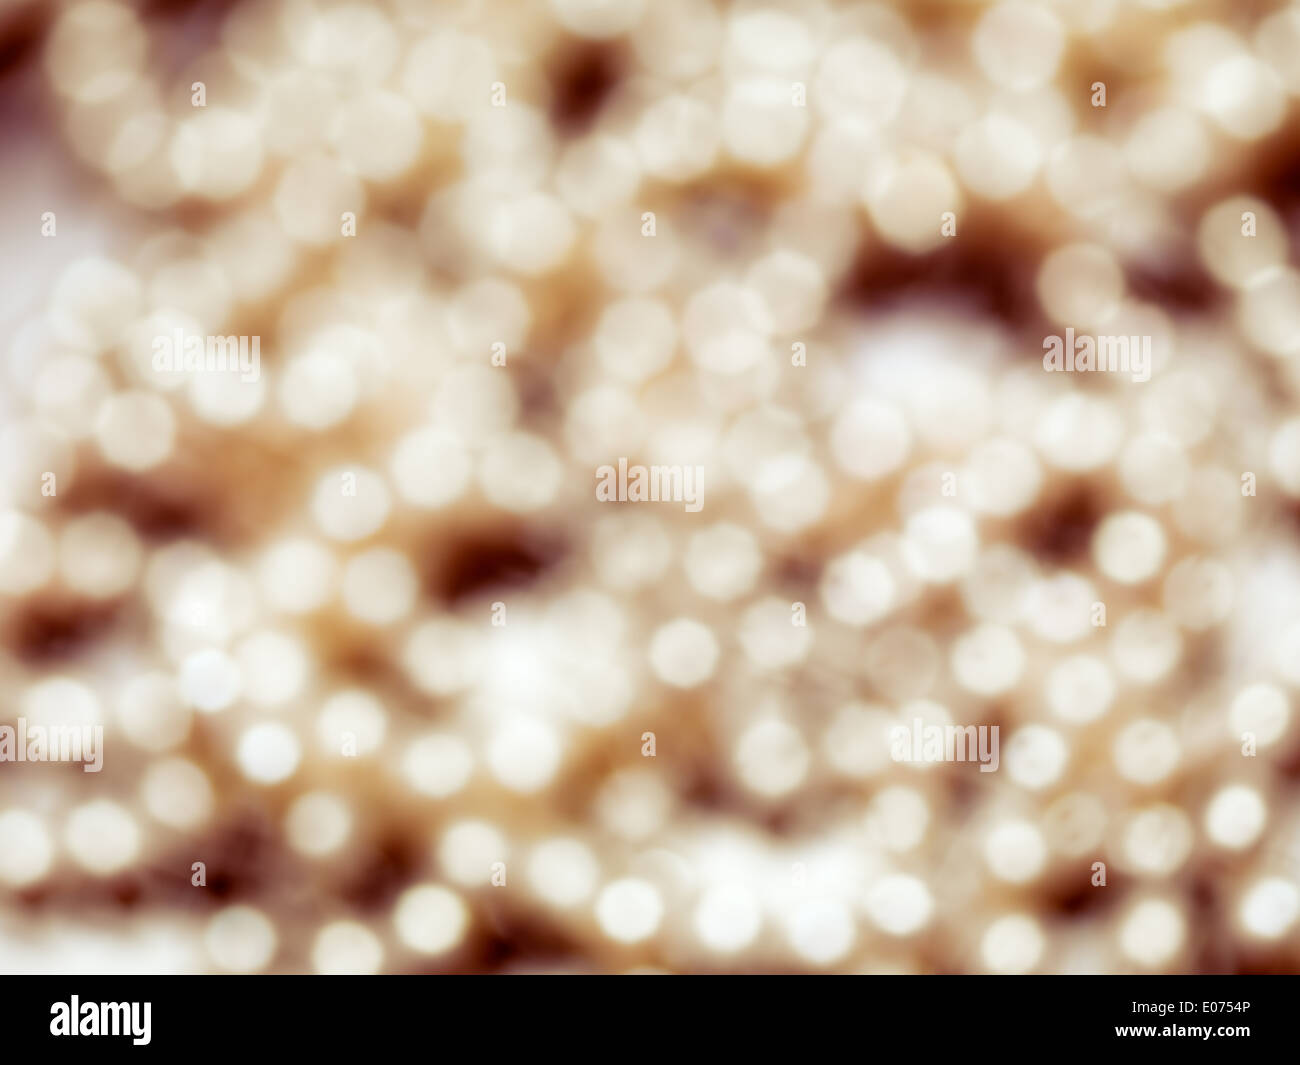 Abstract gold shiny out of focus background texture Stock Photo